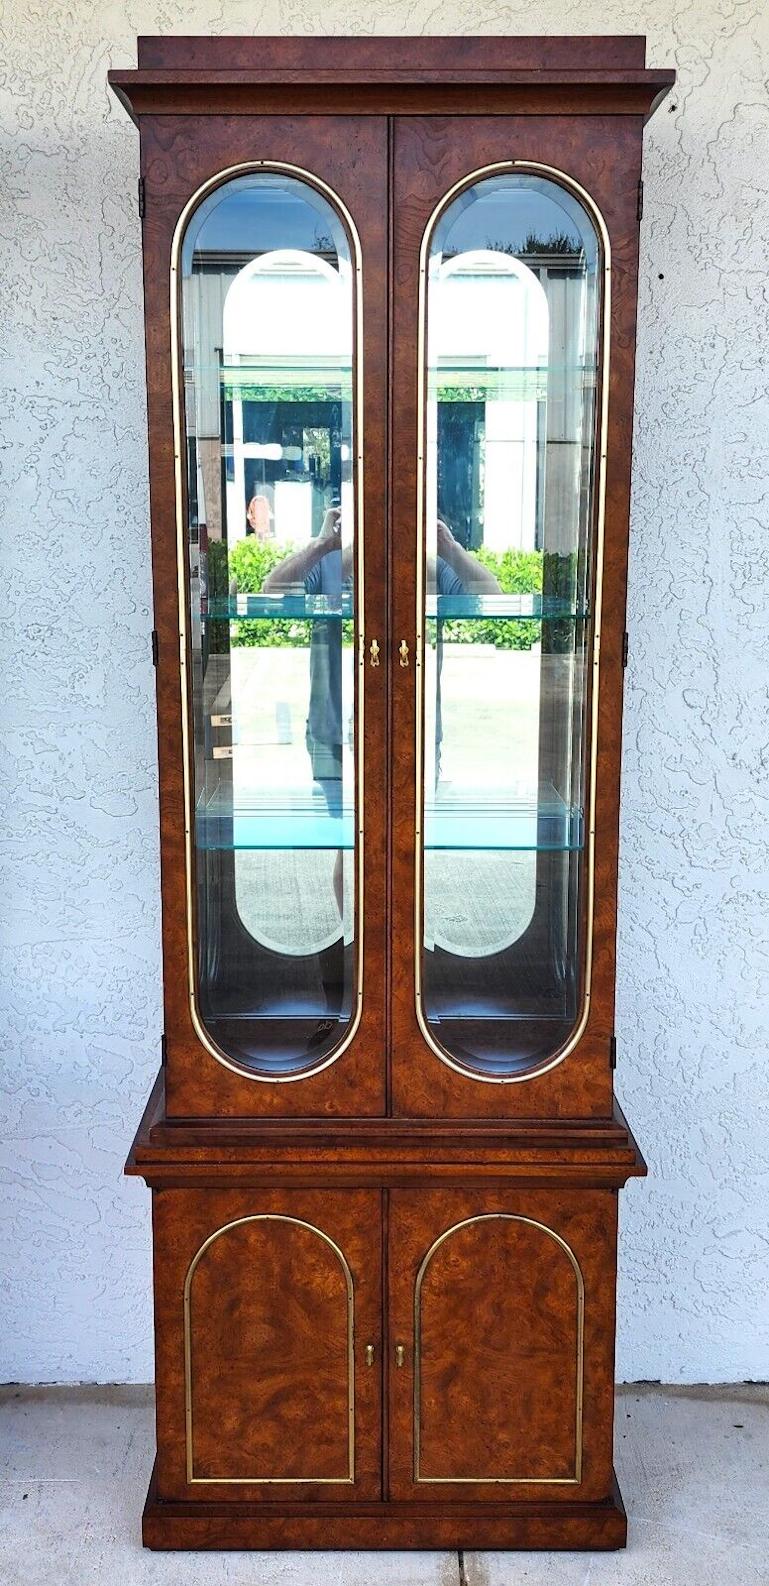 For FULL item description click on CONTINUE READING at the bottom of this page.

Offering One Of Our Recent Palm Beach Estate Fine Furniture Acquisitions Of An
Set of 2 Exceptional Mid-Century 2 Door Display Cases Vitrines by John Stuart
Finished